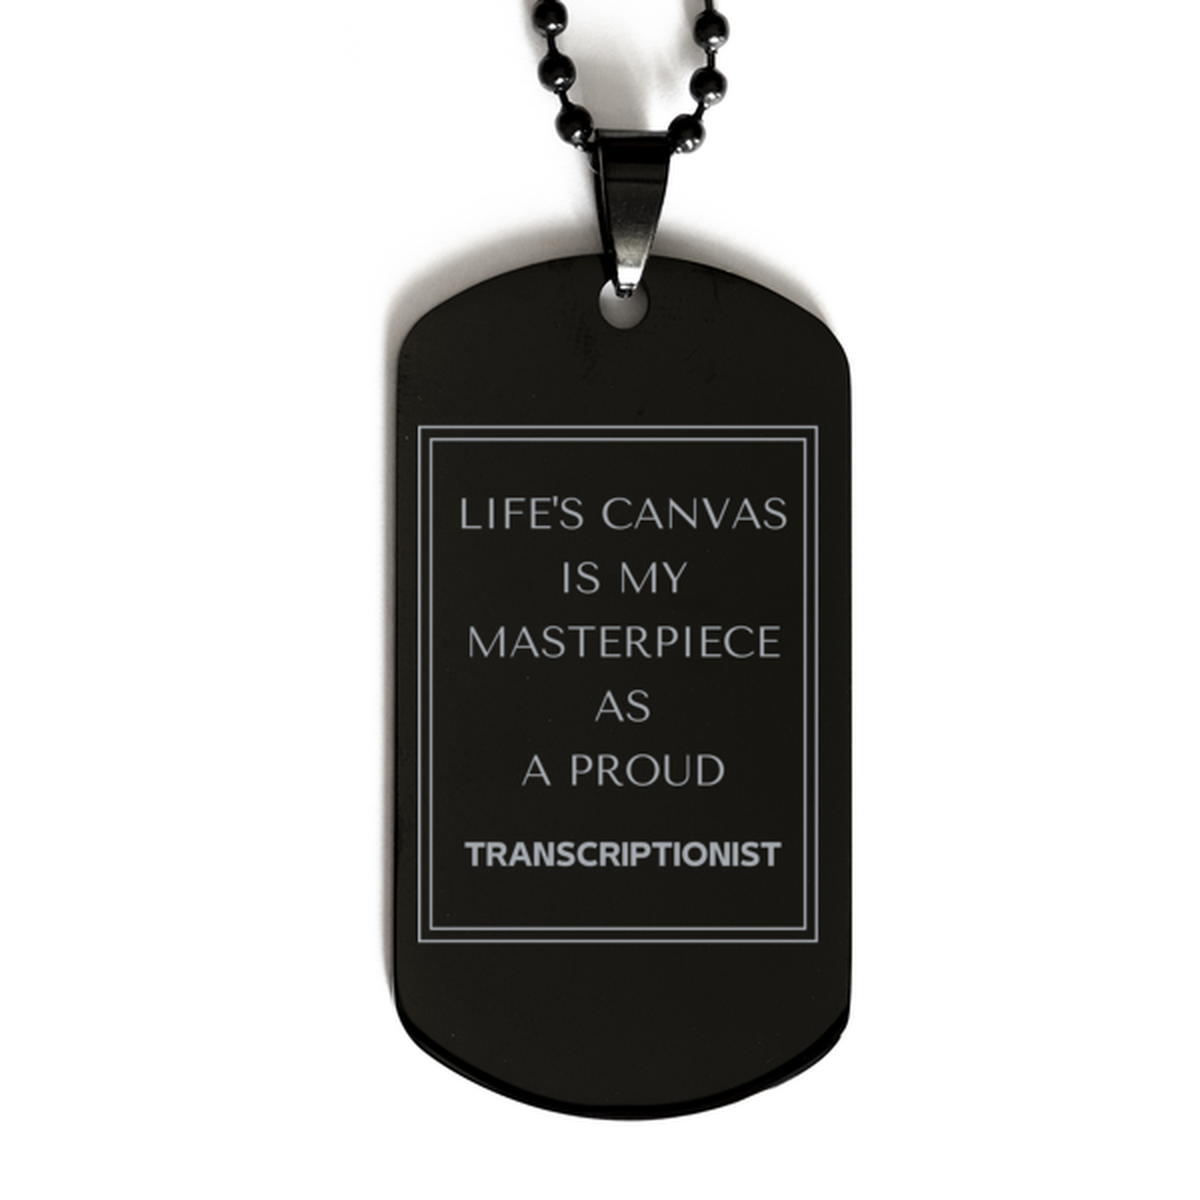 Proud Transcriptionist Gifts, Life's canvas is my masterpiece, Epic Birthday Christmas Unique Black Dog Tag For Transcriptionist, Coworkers, Men, Women, Friends